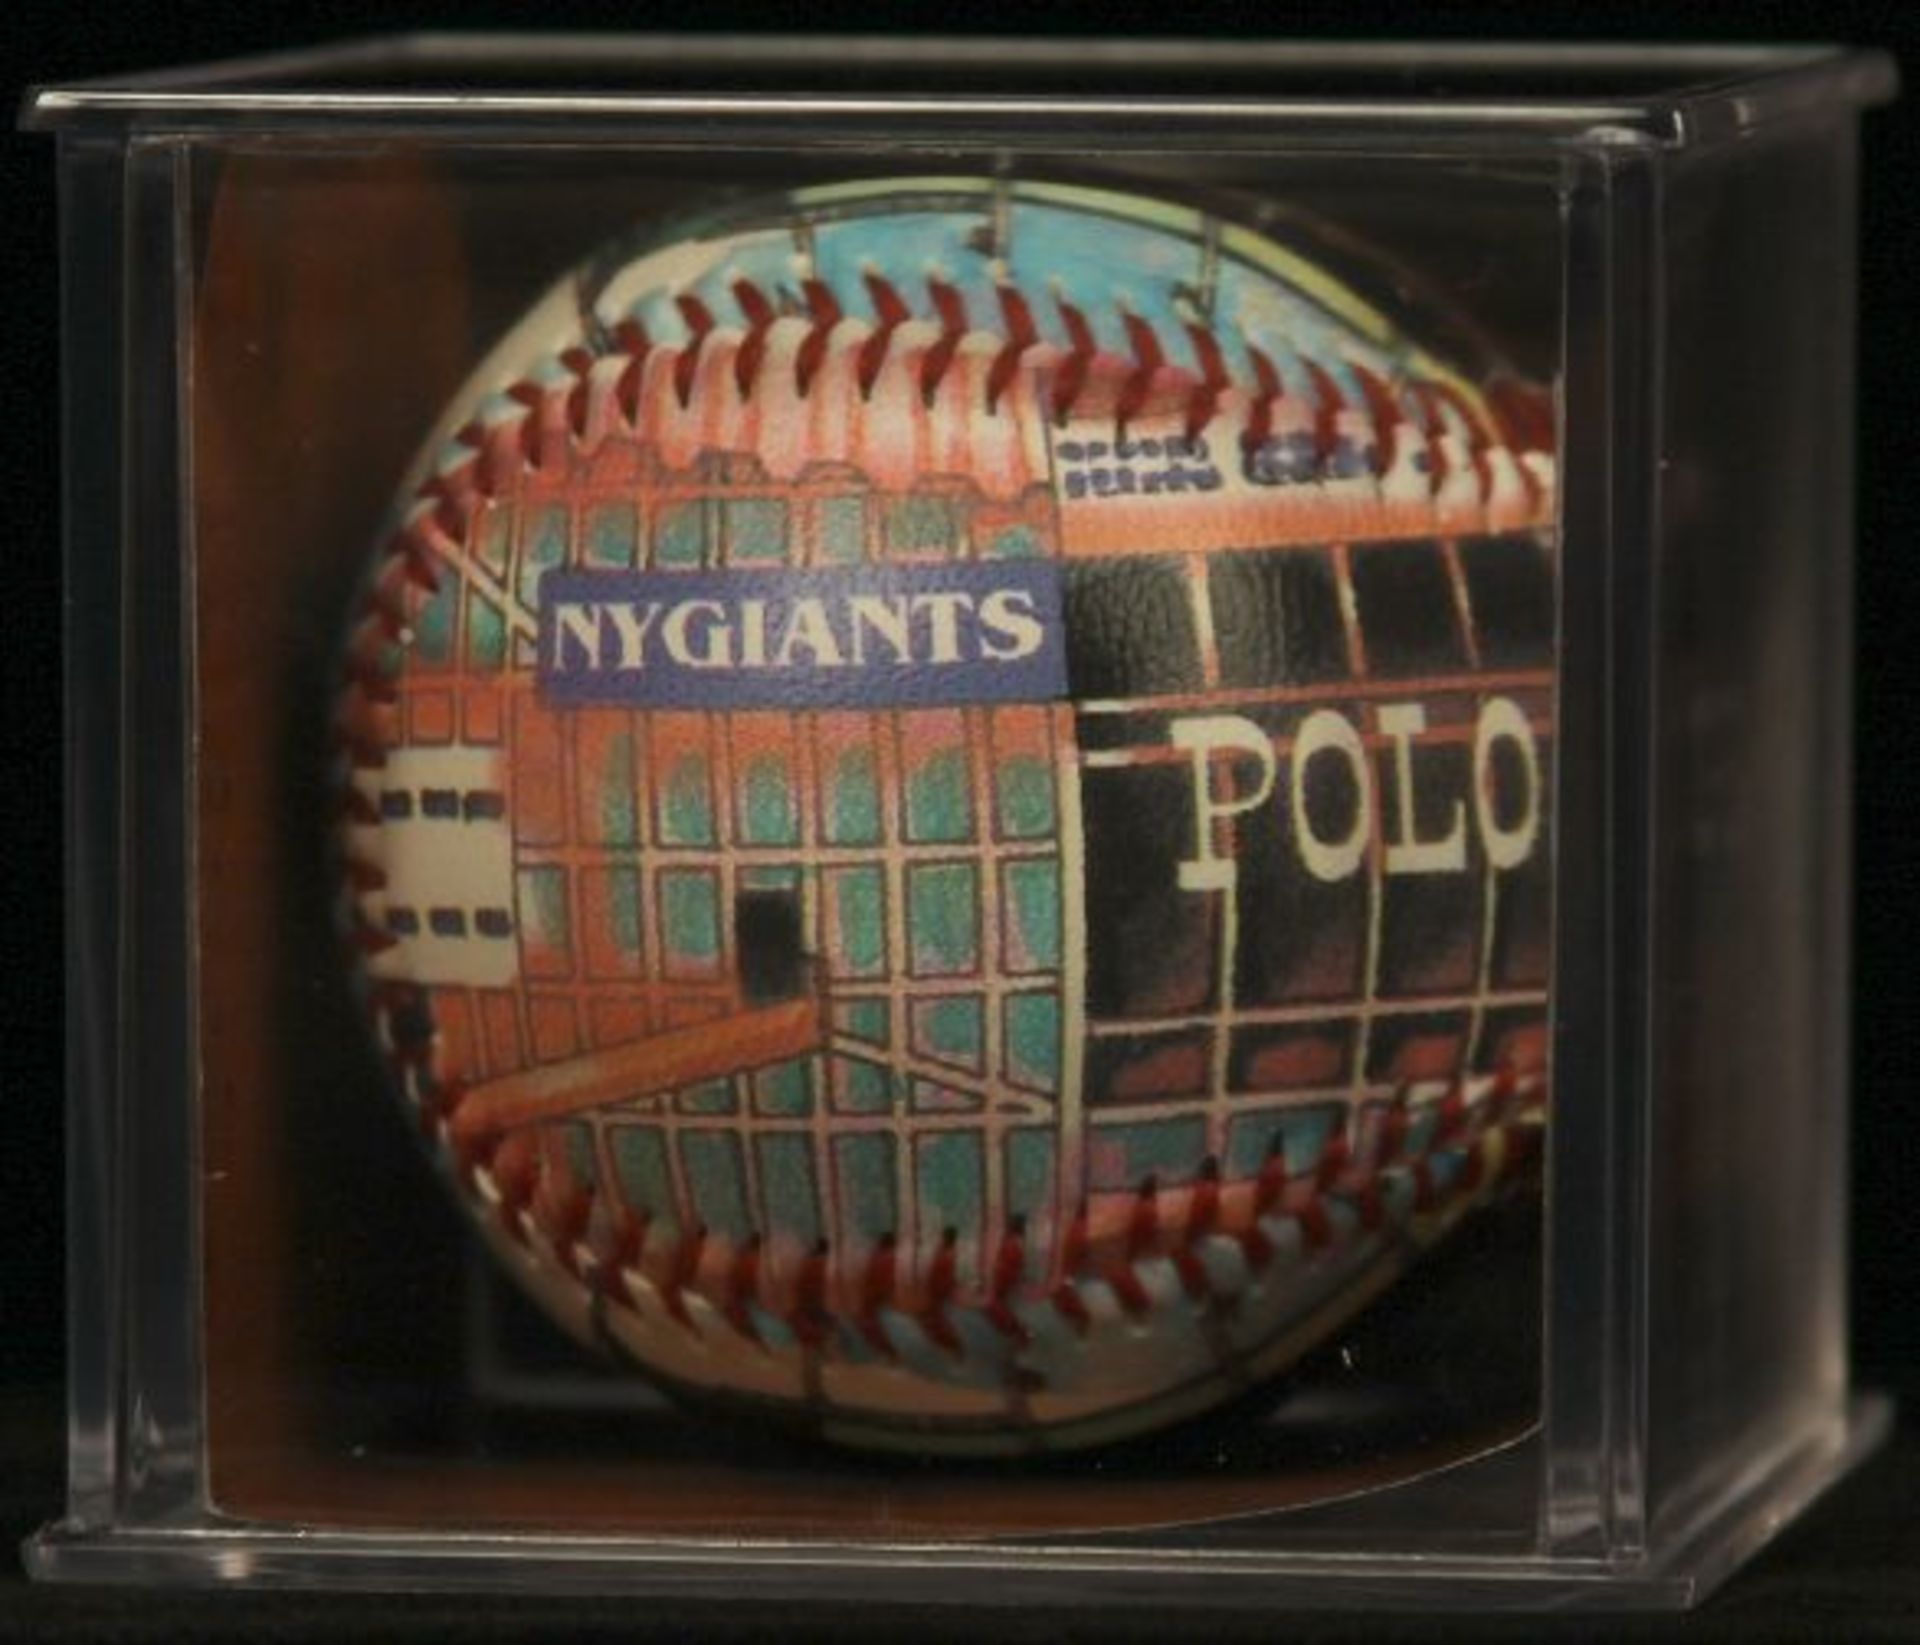 Unforgettaball! "Polo Grounds" Collectable Baseball - Image 2 of 4